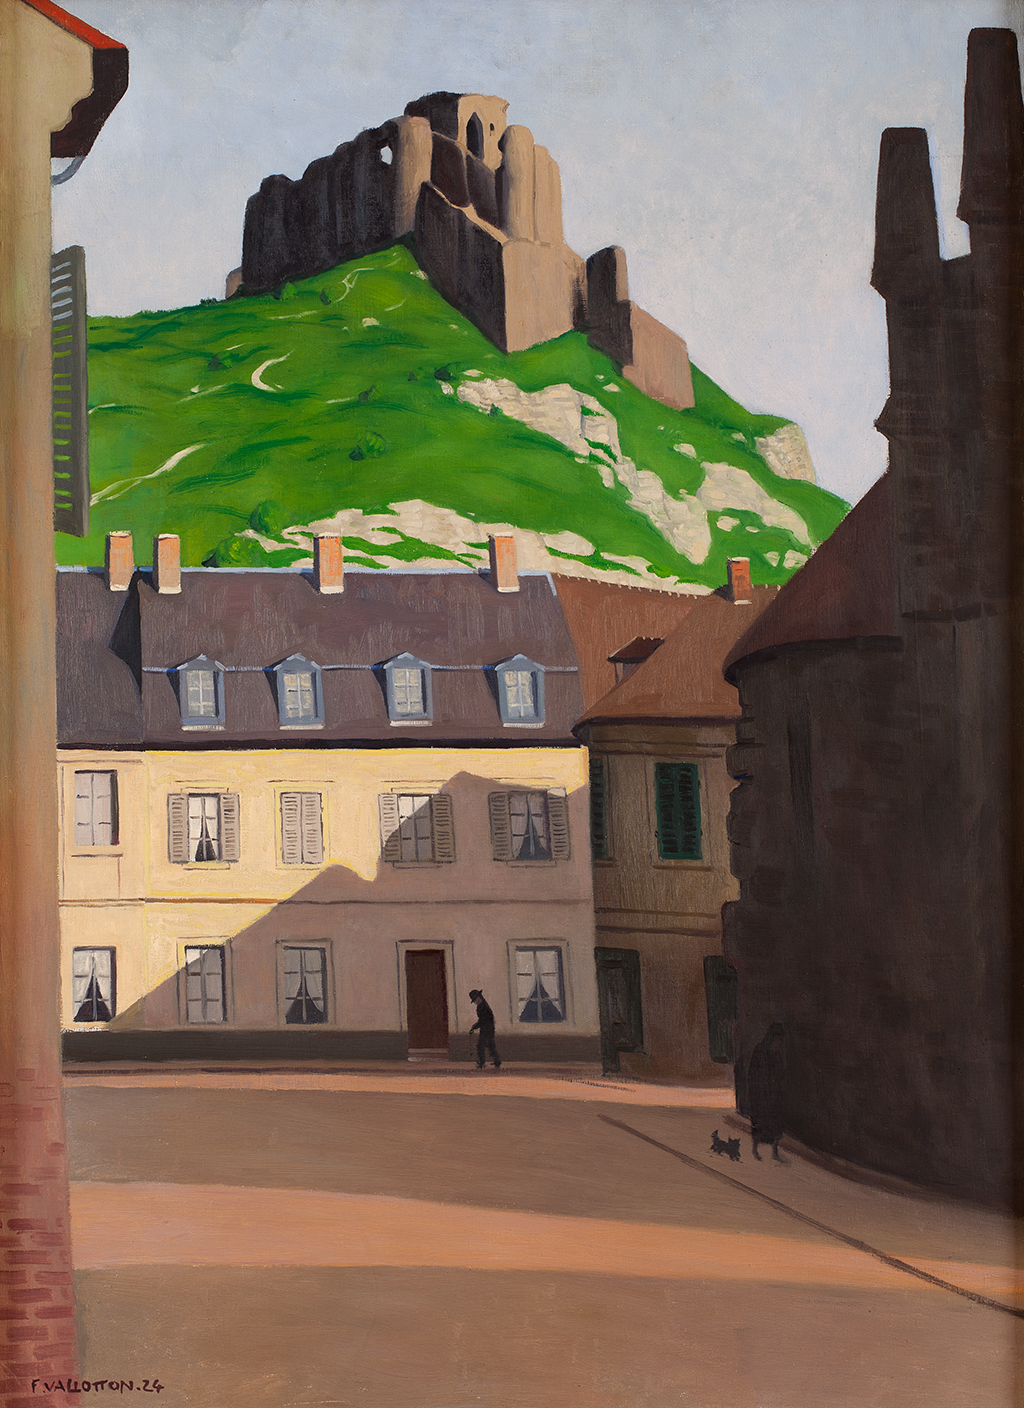 A painting showing a wide street being covered in shadows by the surrounding buildings. Along the sidewalks, there is an animal and two people walking. In the background is a rocky hill covered in grass with the ruins of a structure resting at the top.